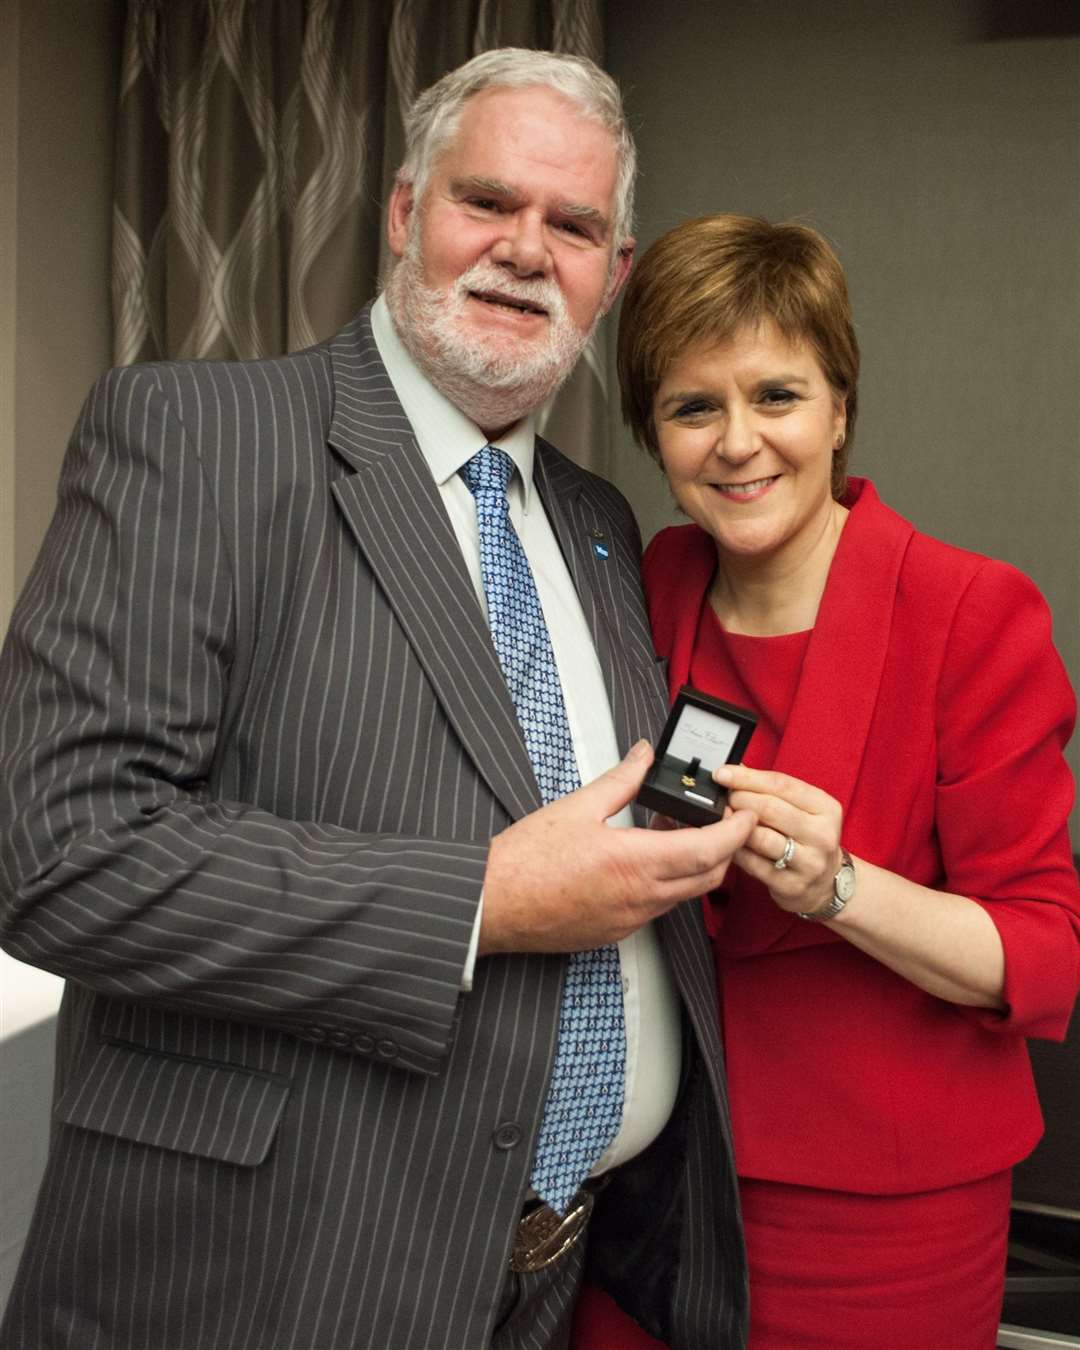 Stuart Pratt with First Minister Nicola Sturgeon at an event in 2017 to mark his service as a local councillor.